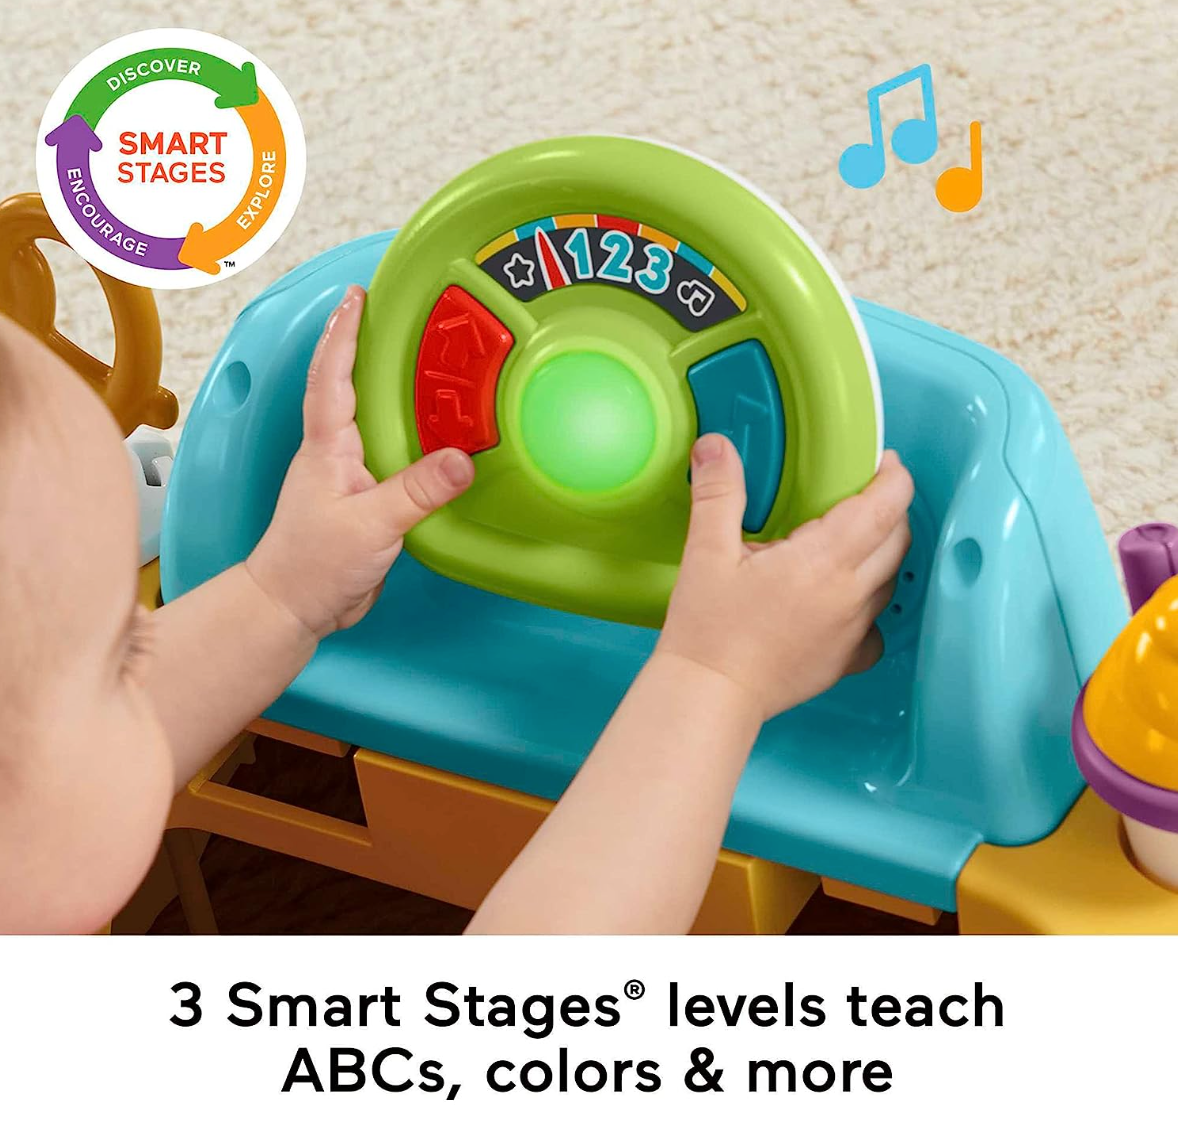 Fisher-Price Baby To Toddler Learning Toy 2-In-1 Servin’ Up Fun Jumperoo Activity Center With Music Lights And Shape Sorting Puzzle Play